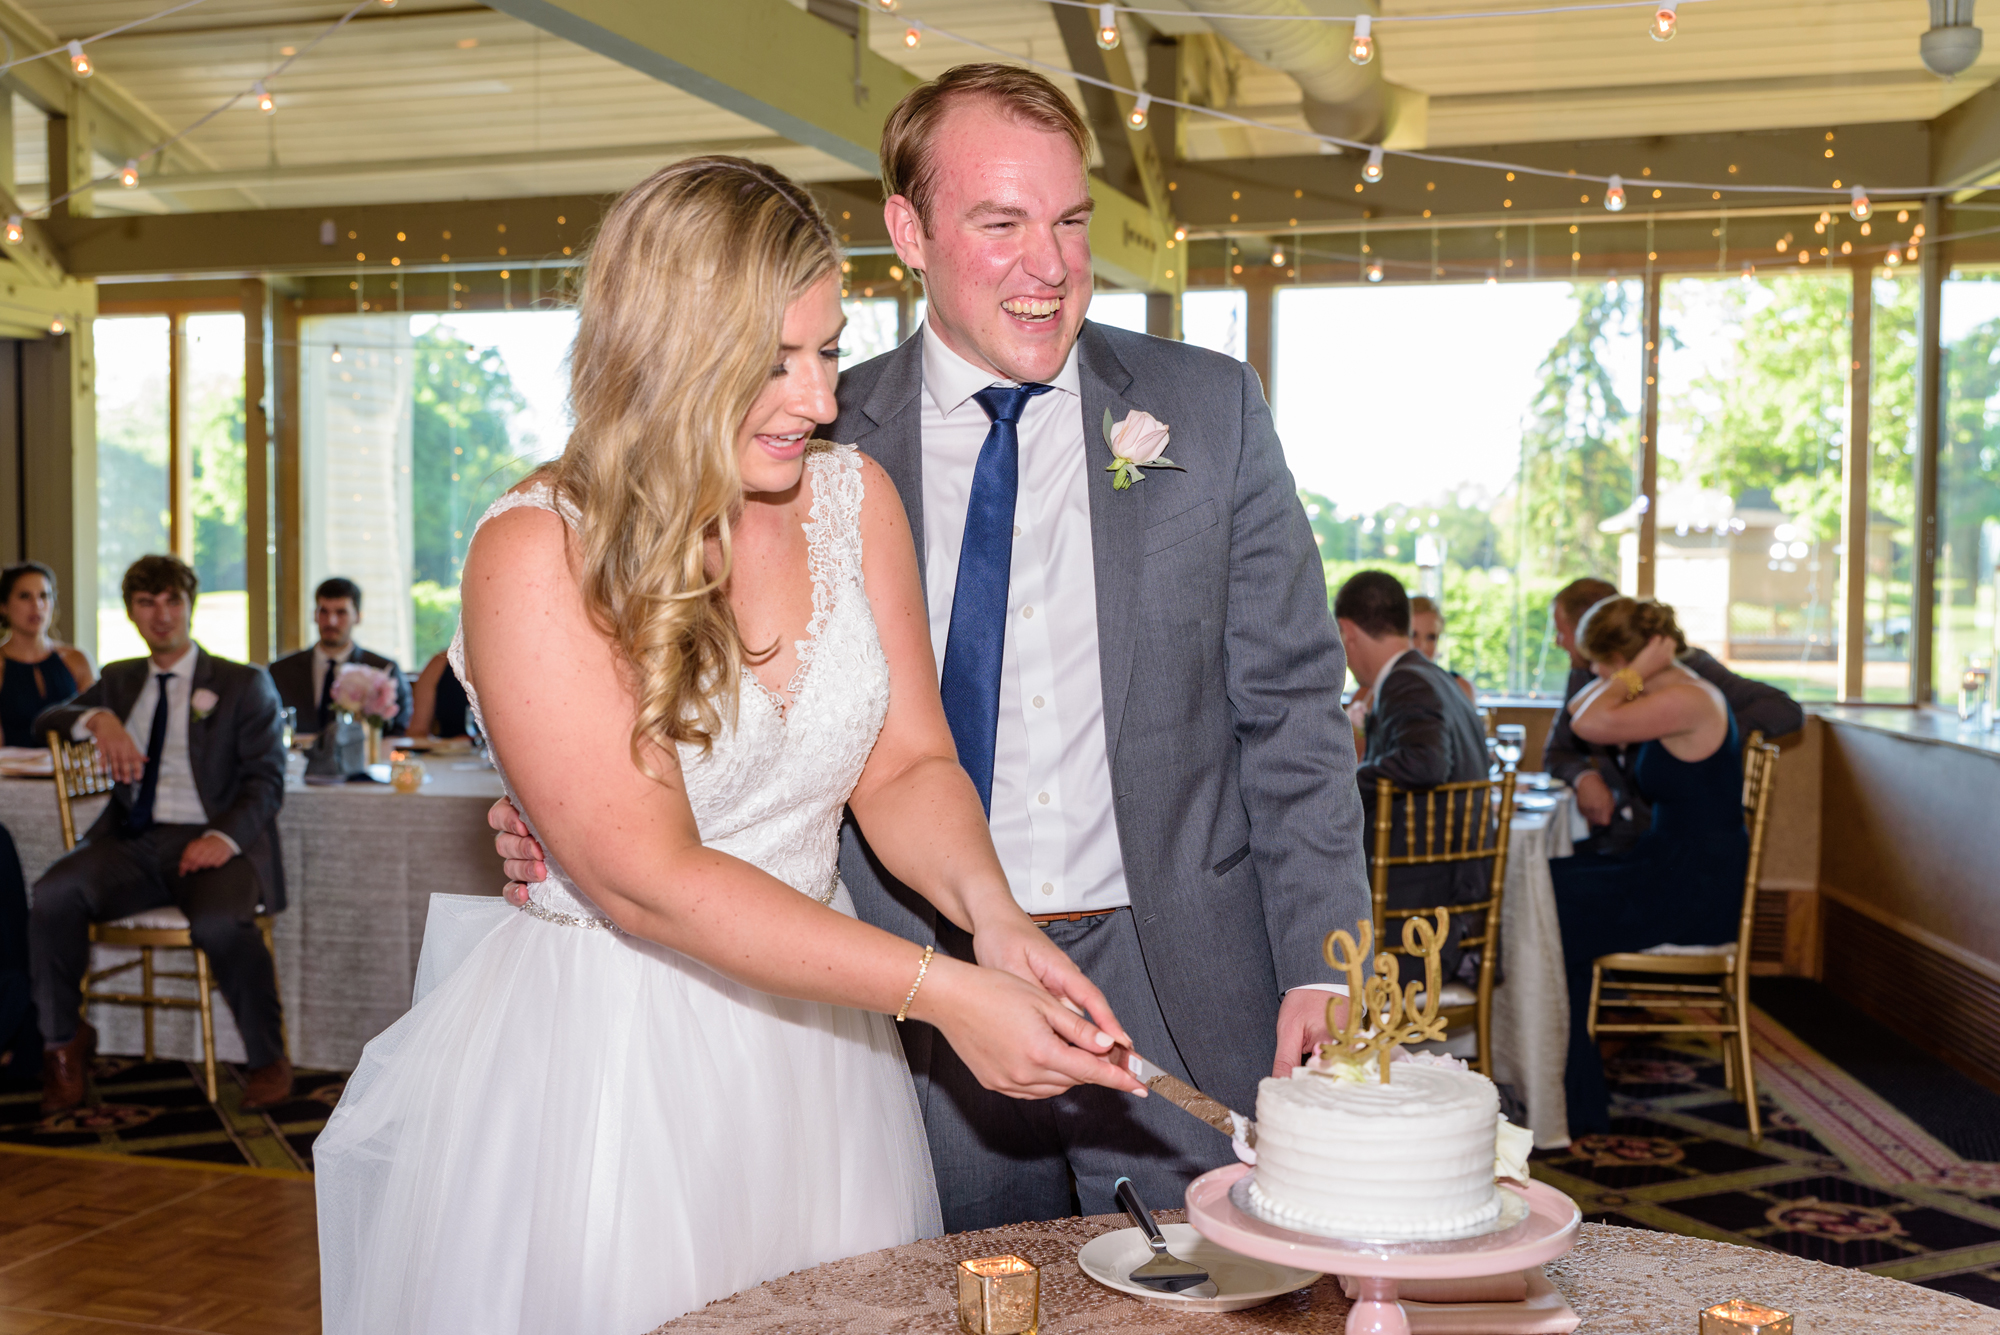 cake cutting at a wedding reception at Morris Park Country Club